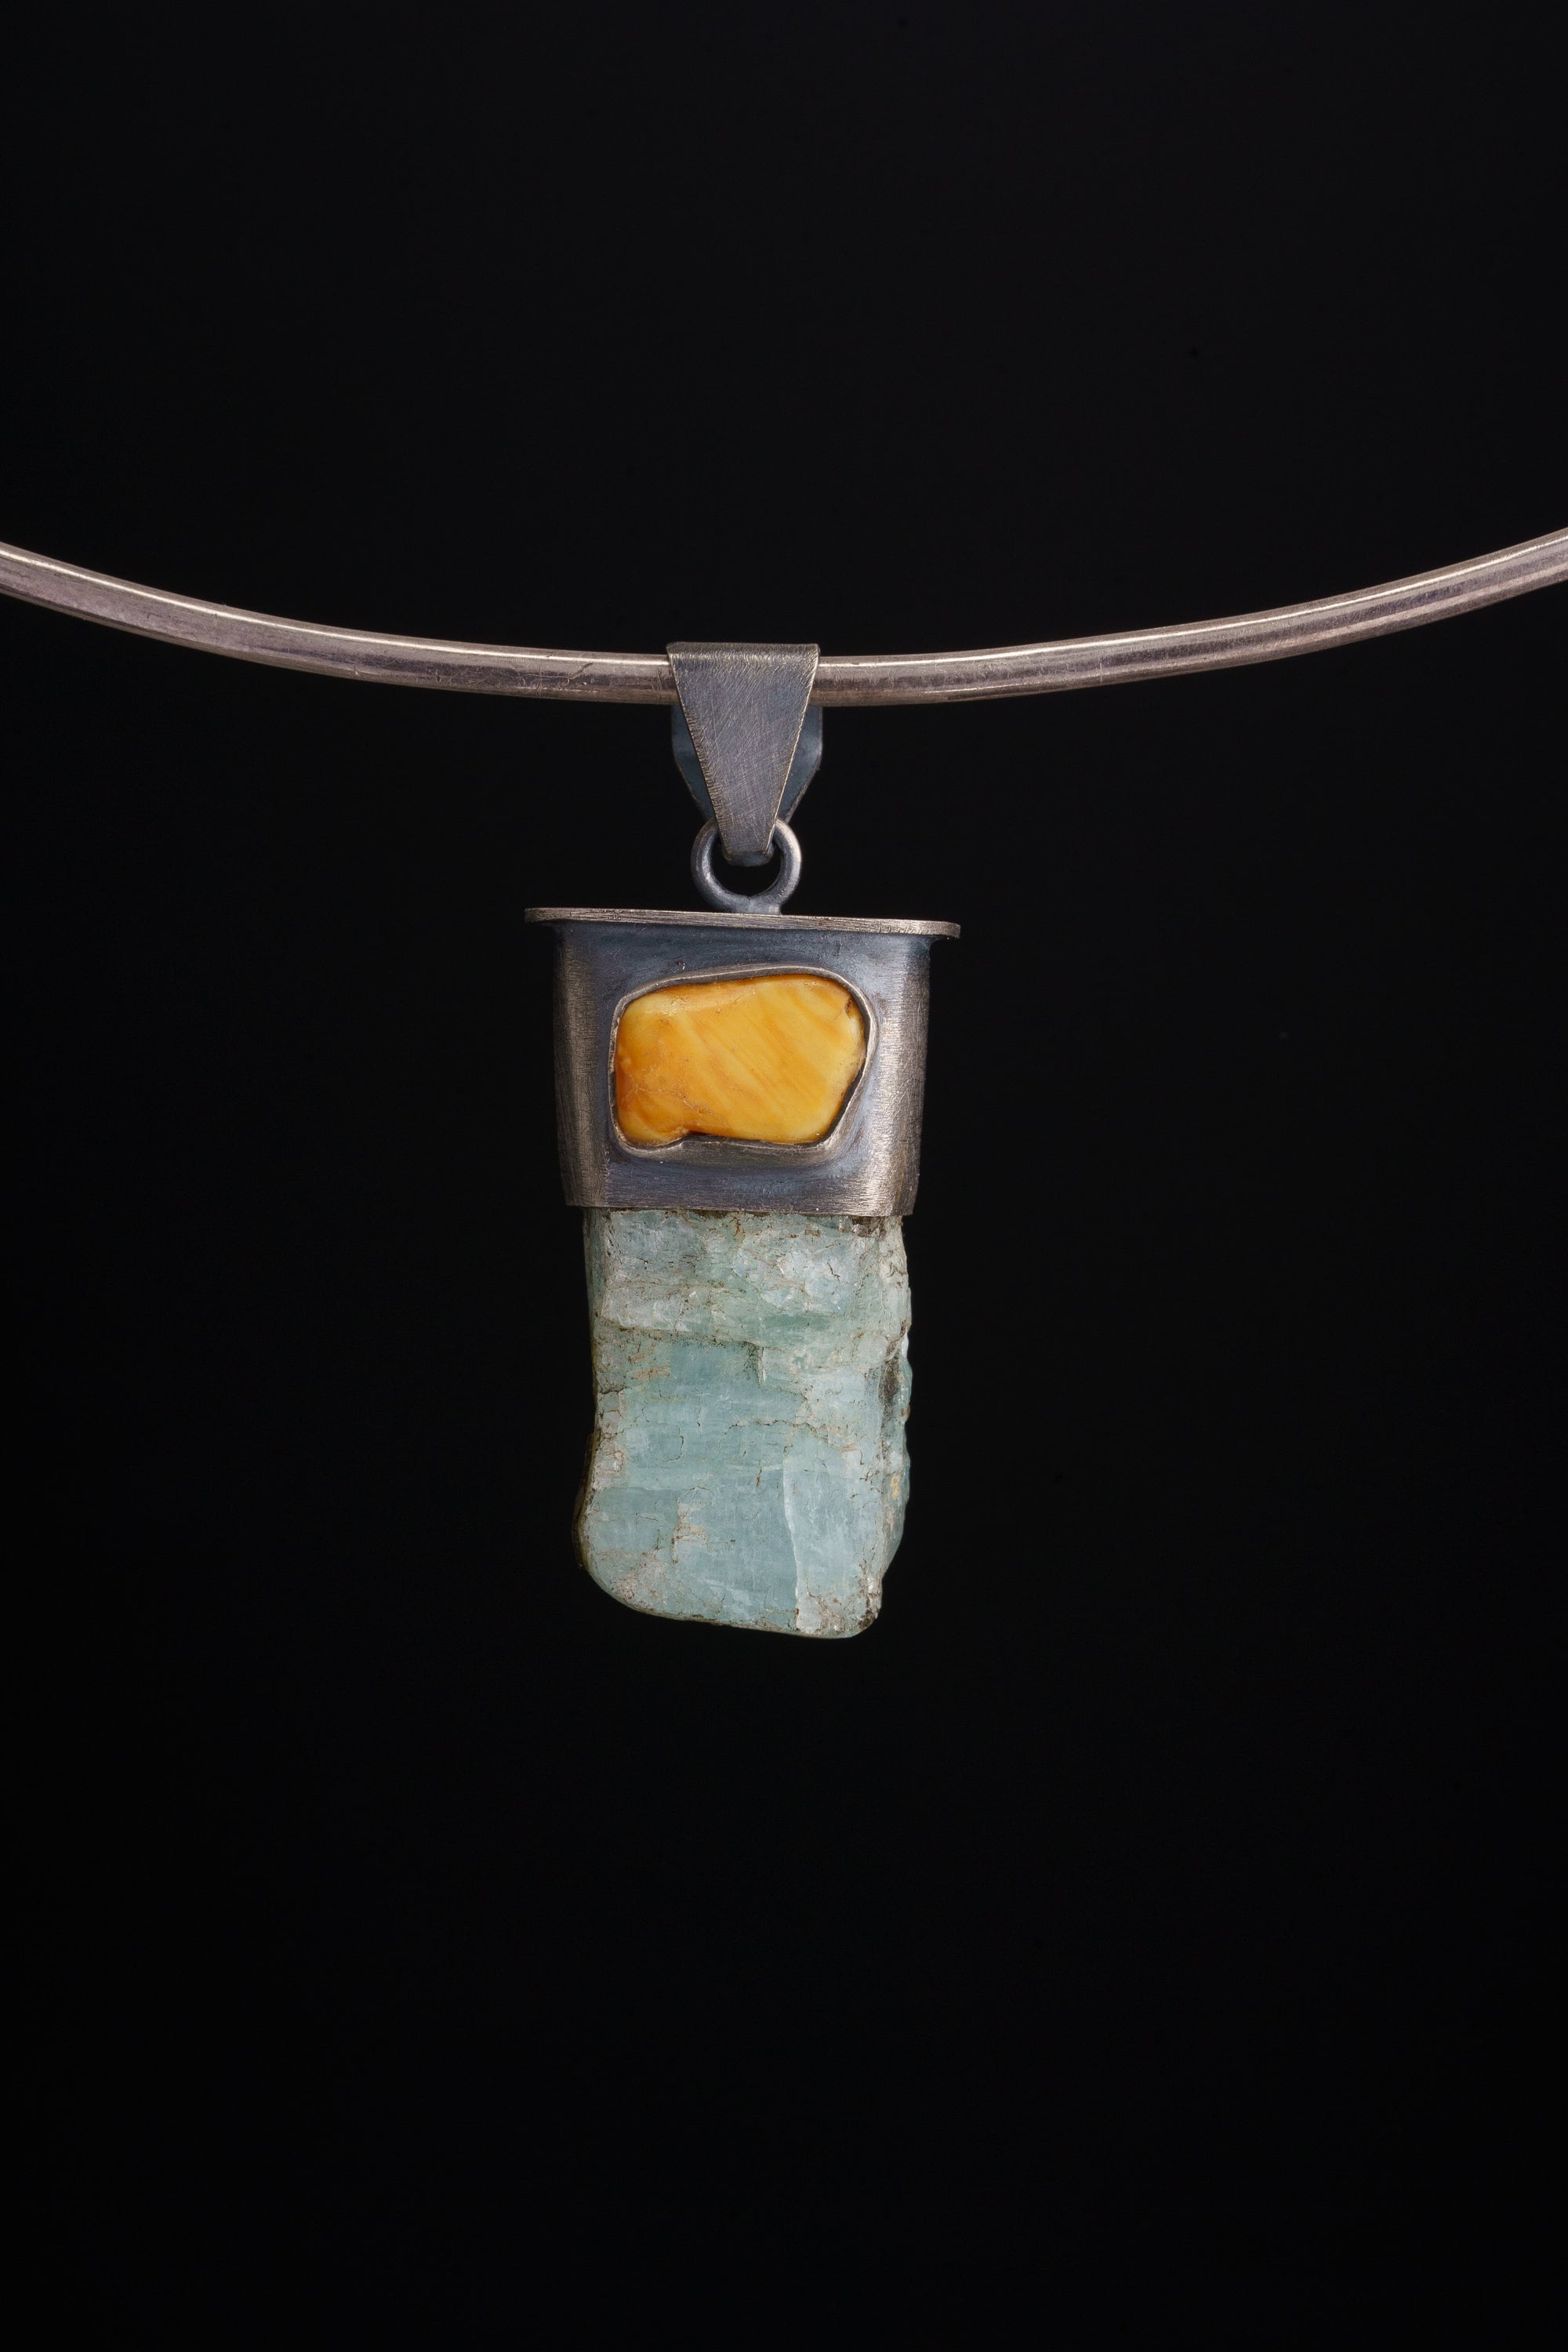 Heavy-Set Oxidised Sterling Silver Pendant with Hand-Sourced Australian Aquamarine & Baltic Amber Accents - A Rustic Tribute to Sea and Sun